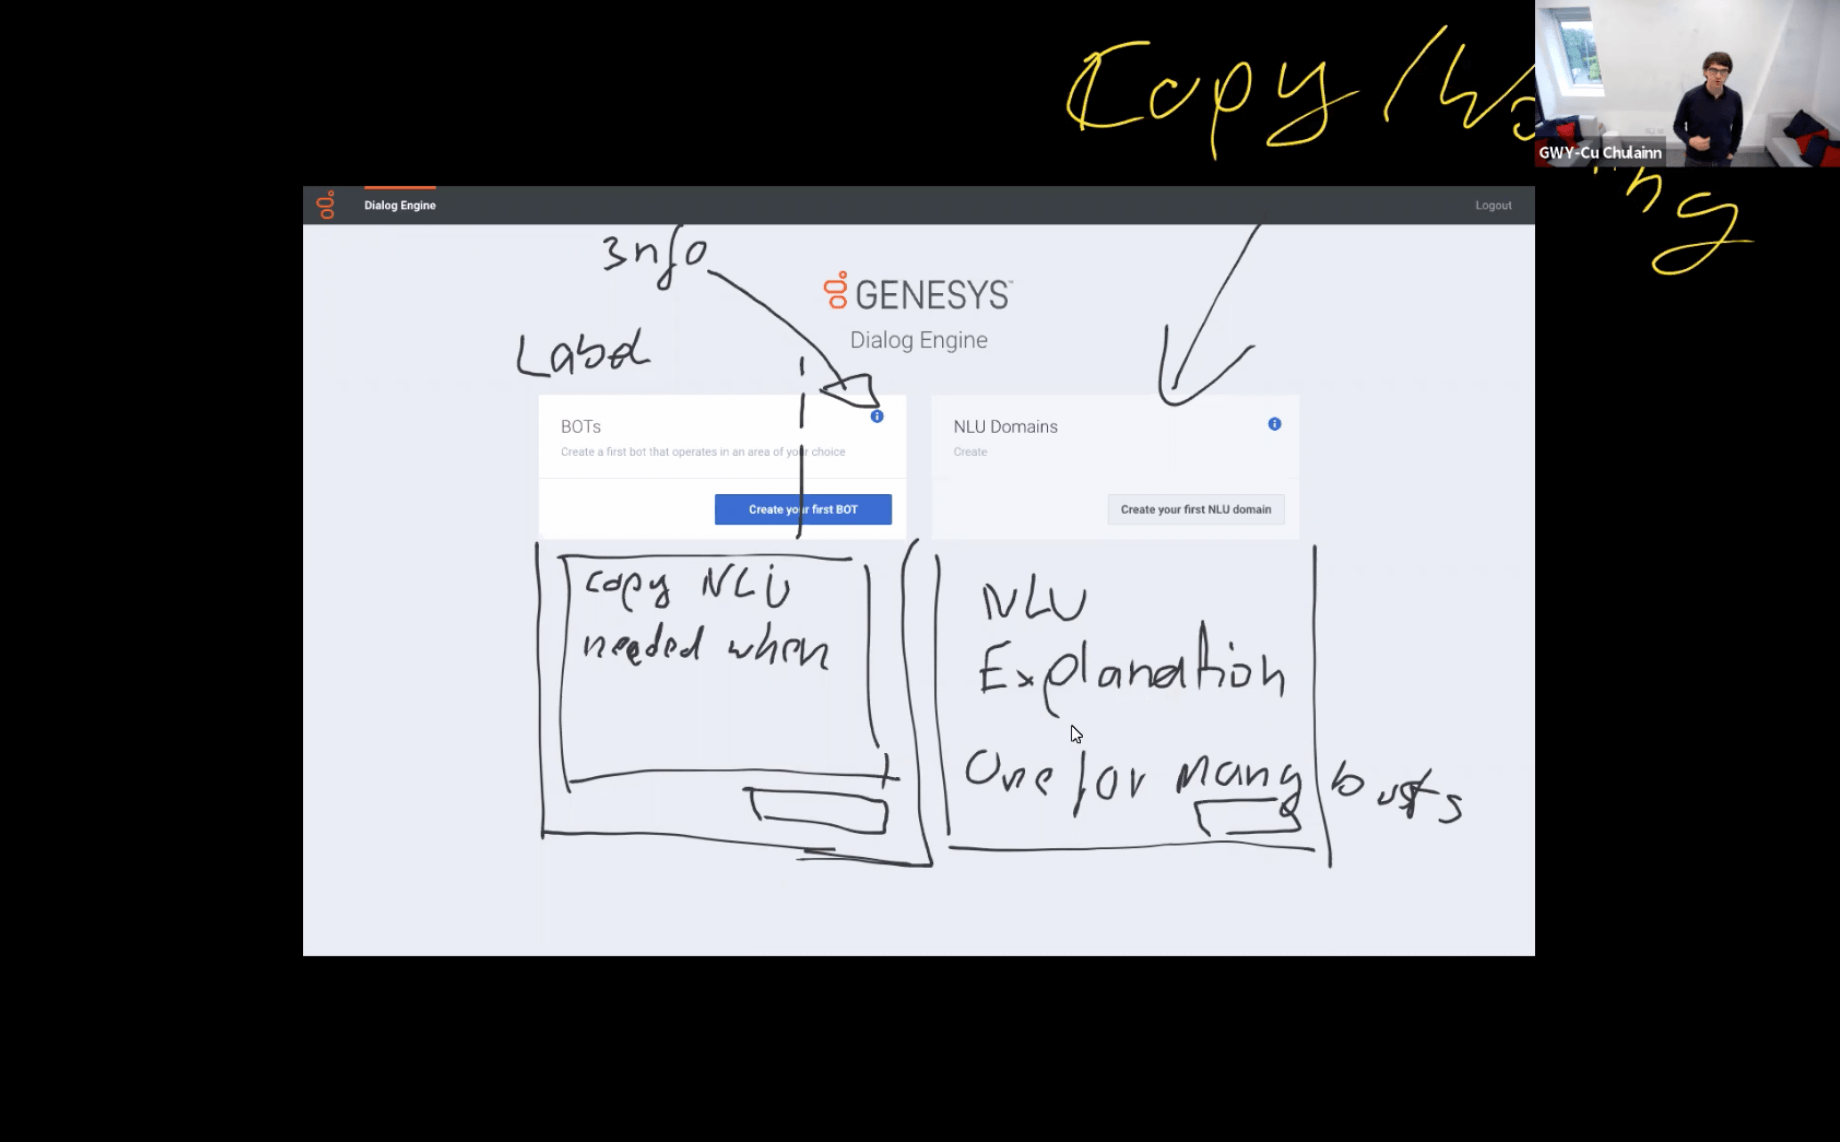 Screenshot from a real whiteboard session with engeniering